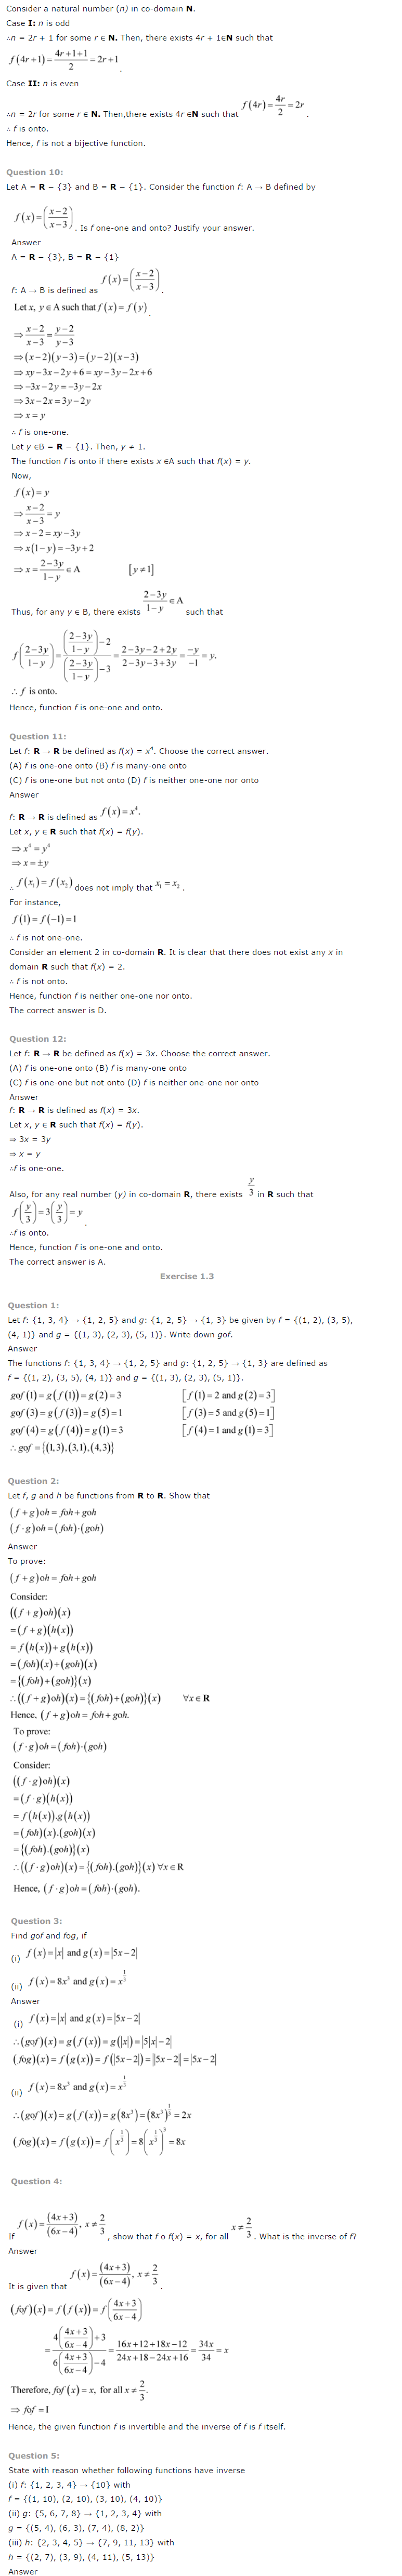 NCERT Solutions For Class 12 Maths Chapter 1 Relations and Functions 5